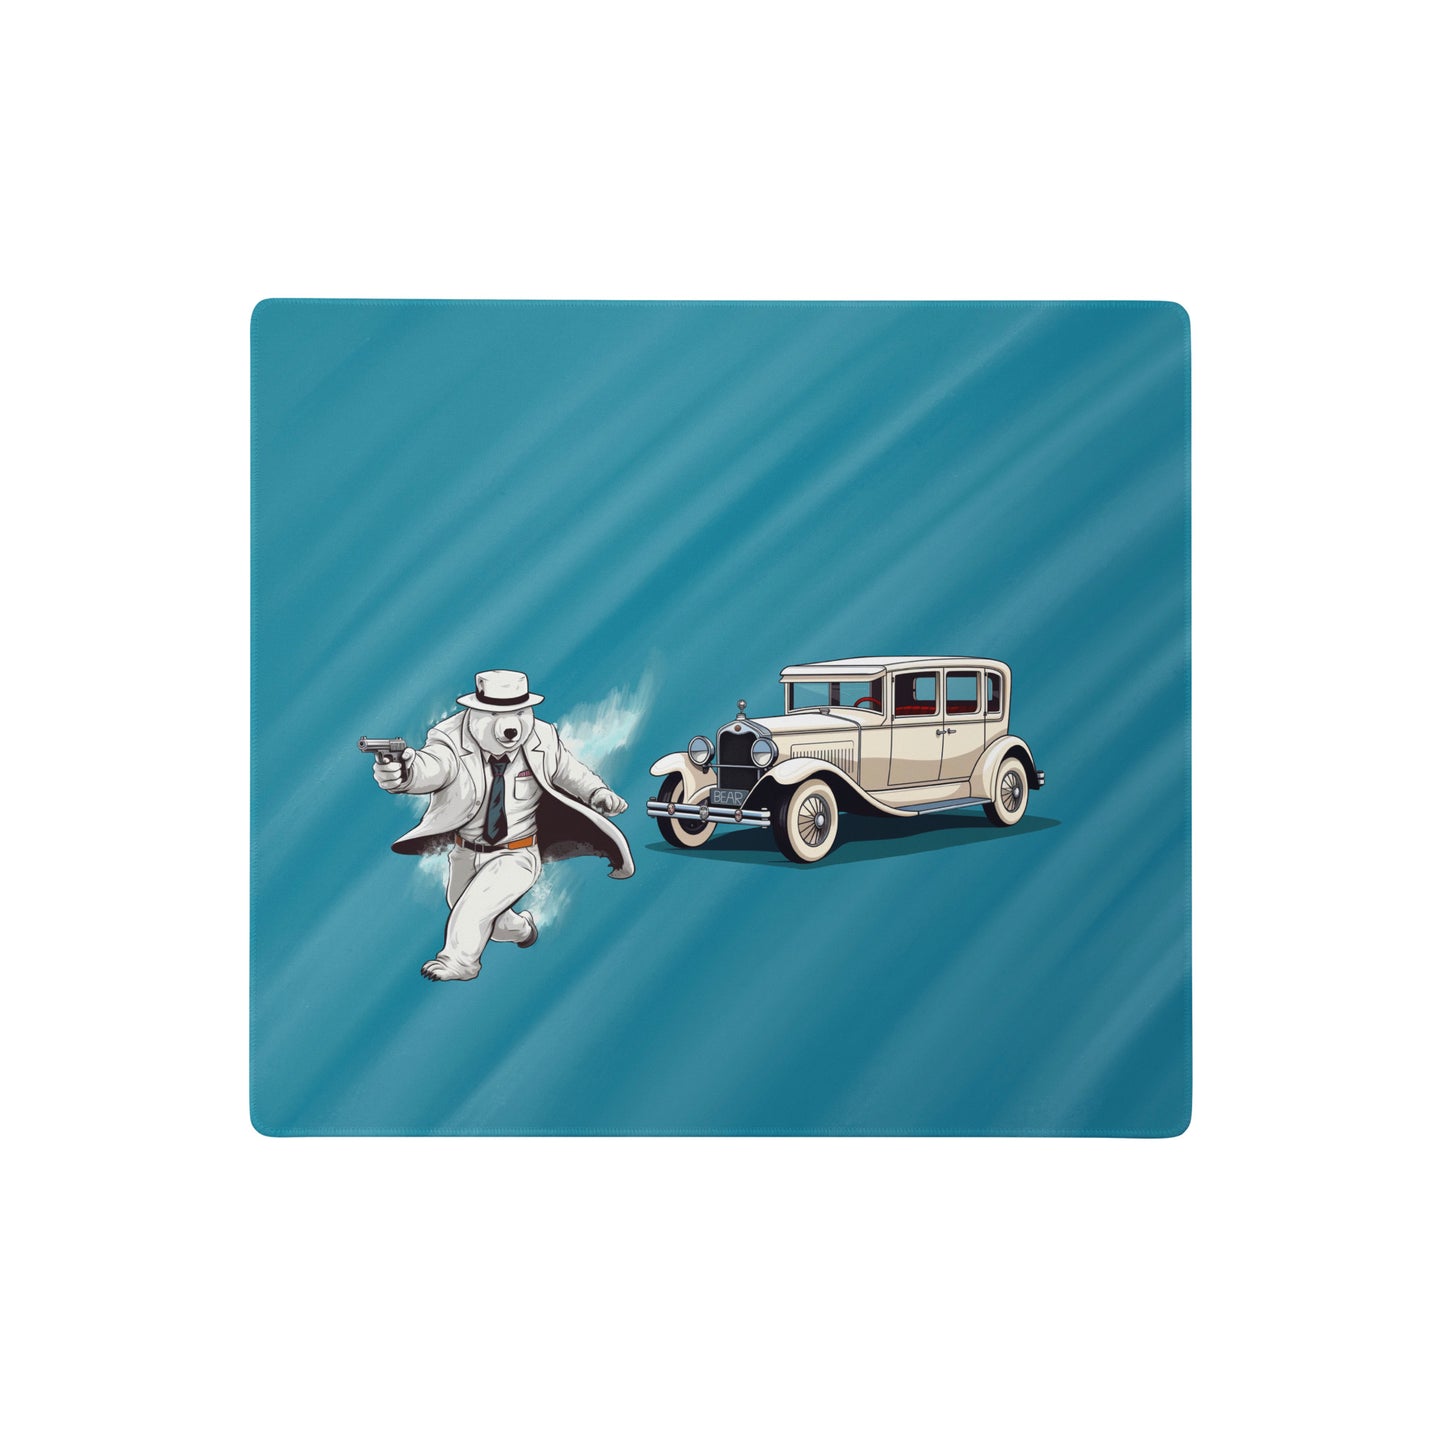 An 18" x 16" desk pad with a gangster polar bear and his car on the left. Blue in color.